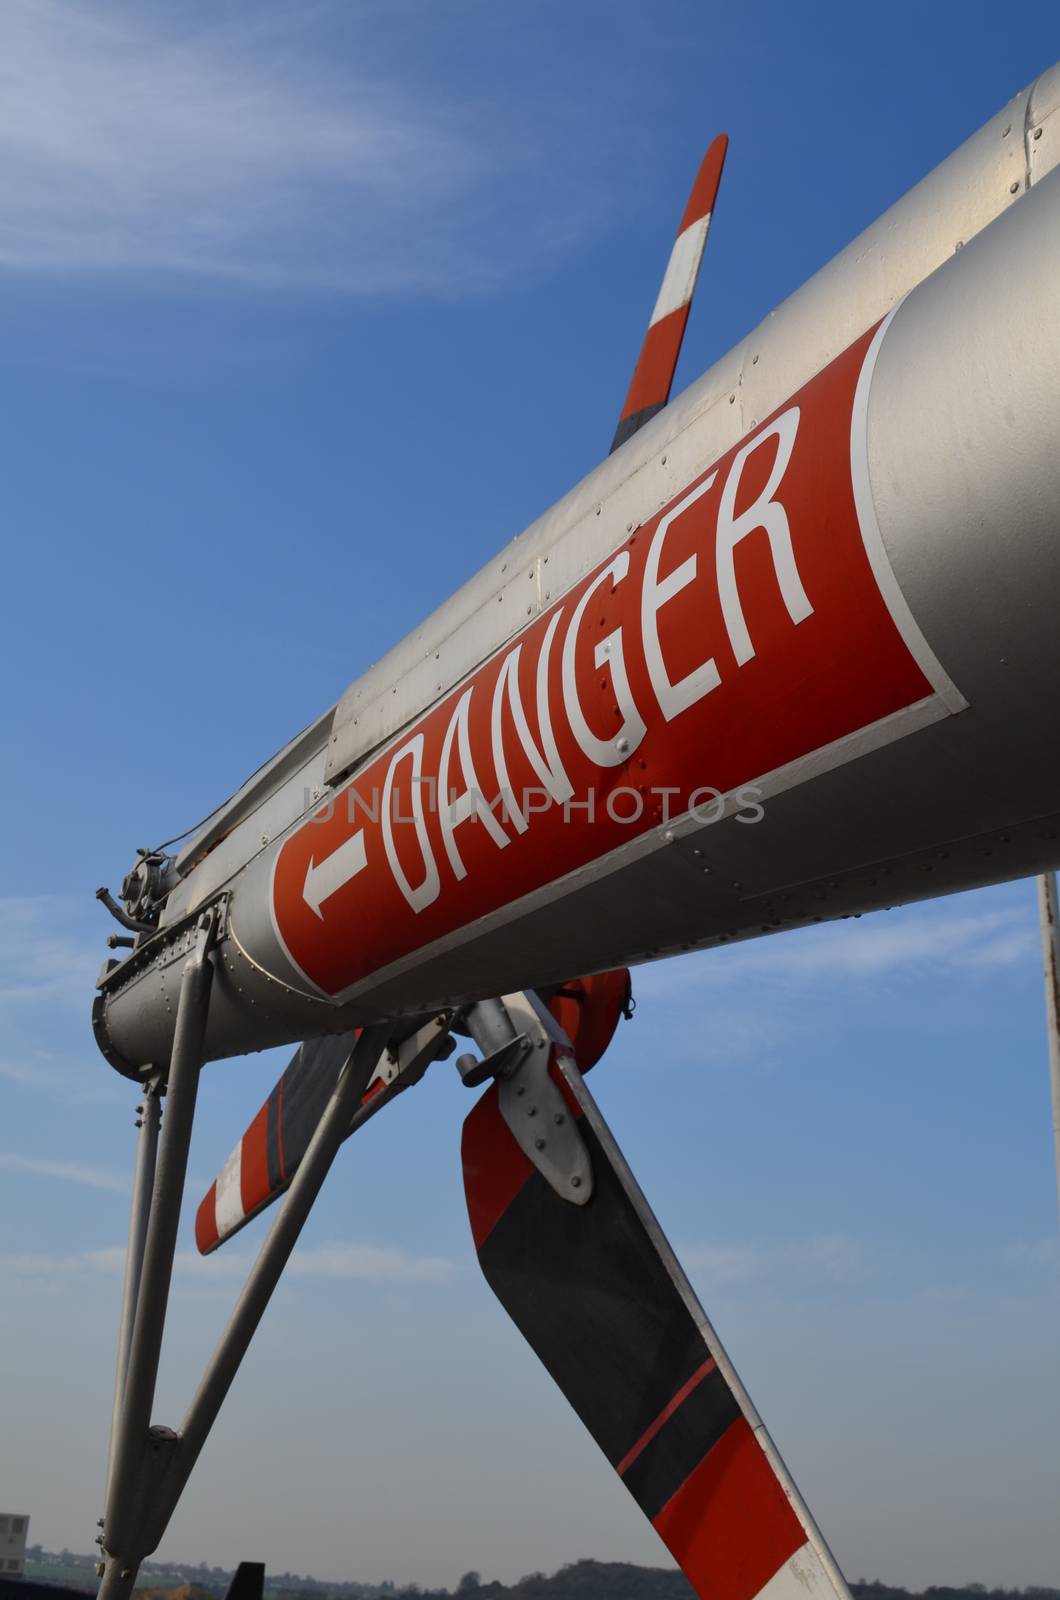 Military helicopters tail rotor blades showing danger warning sign.